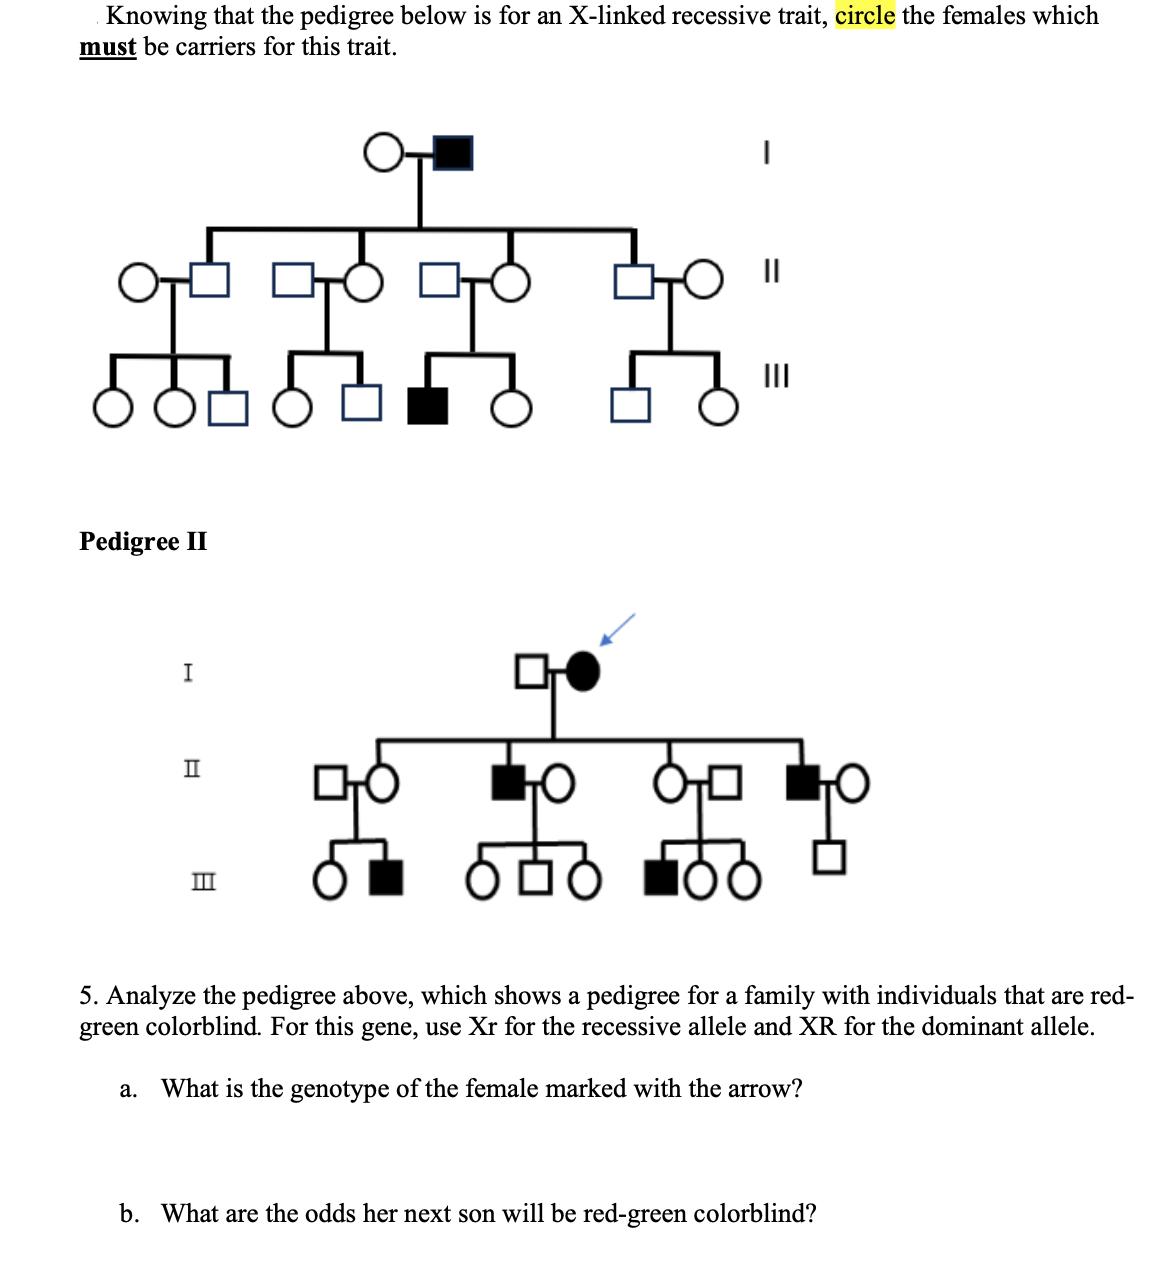 Knowing that the pedigree below is for an X-linked recessive trait, circle the females which must be carriers